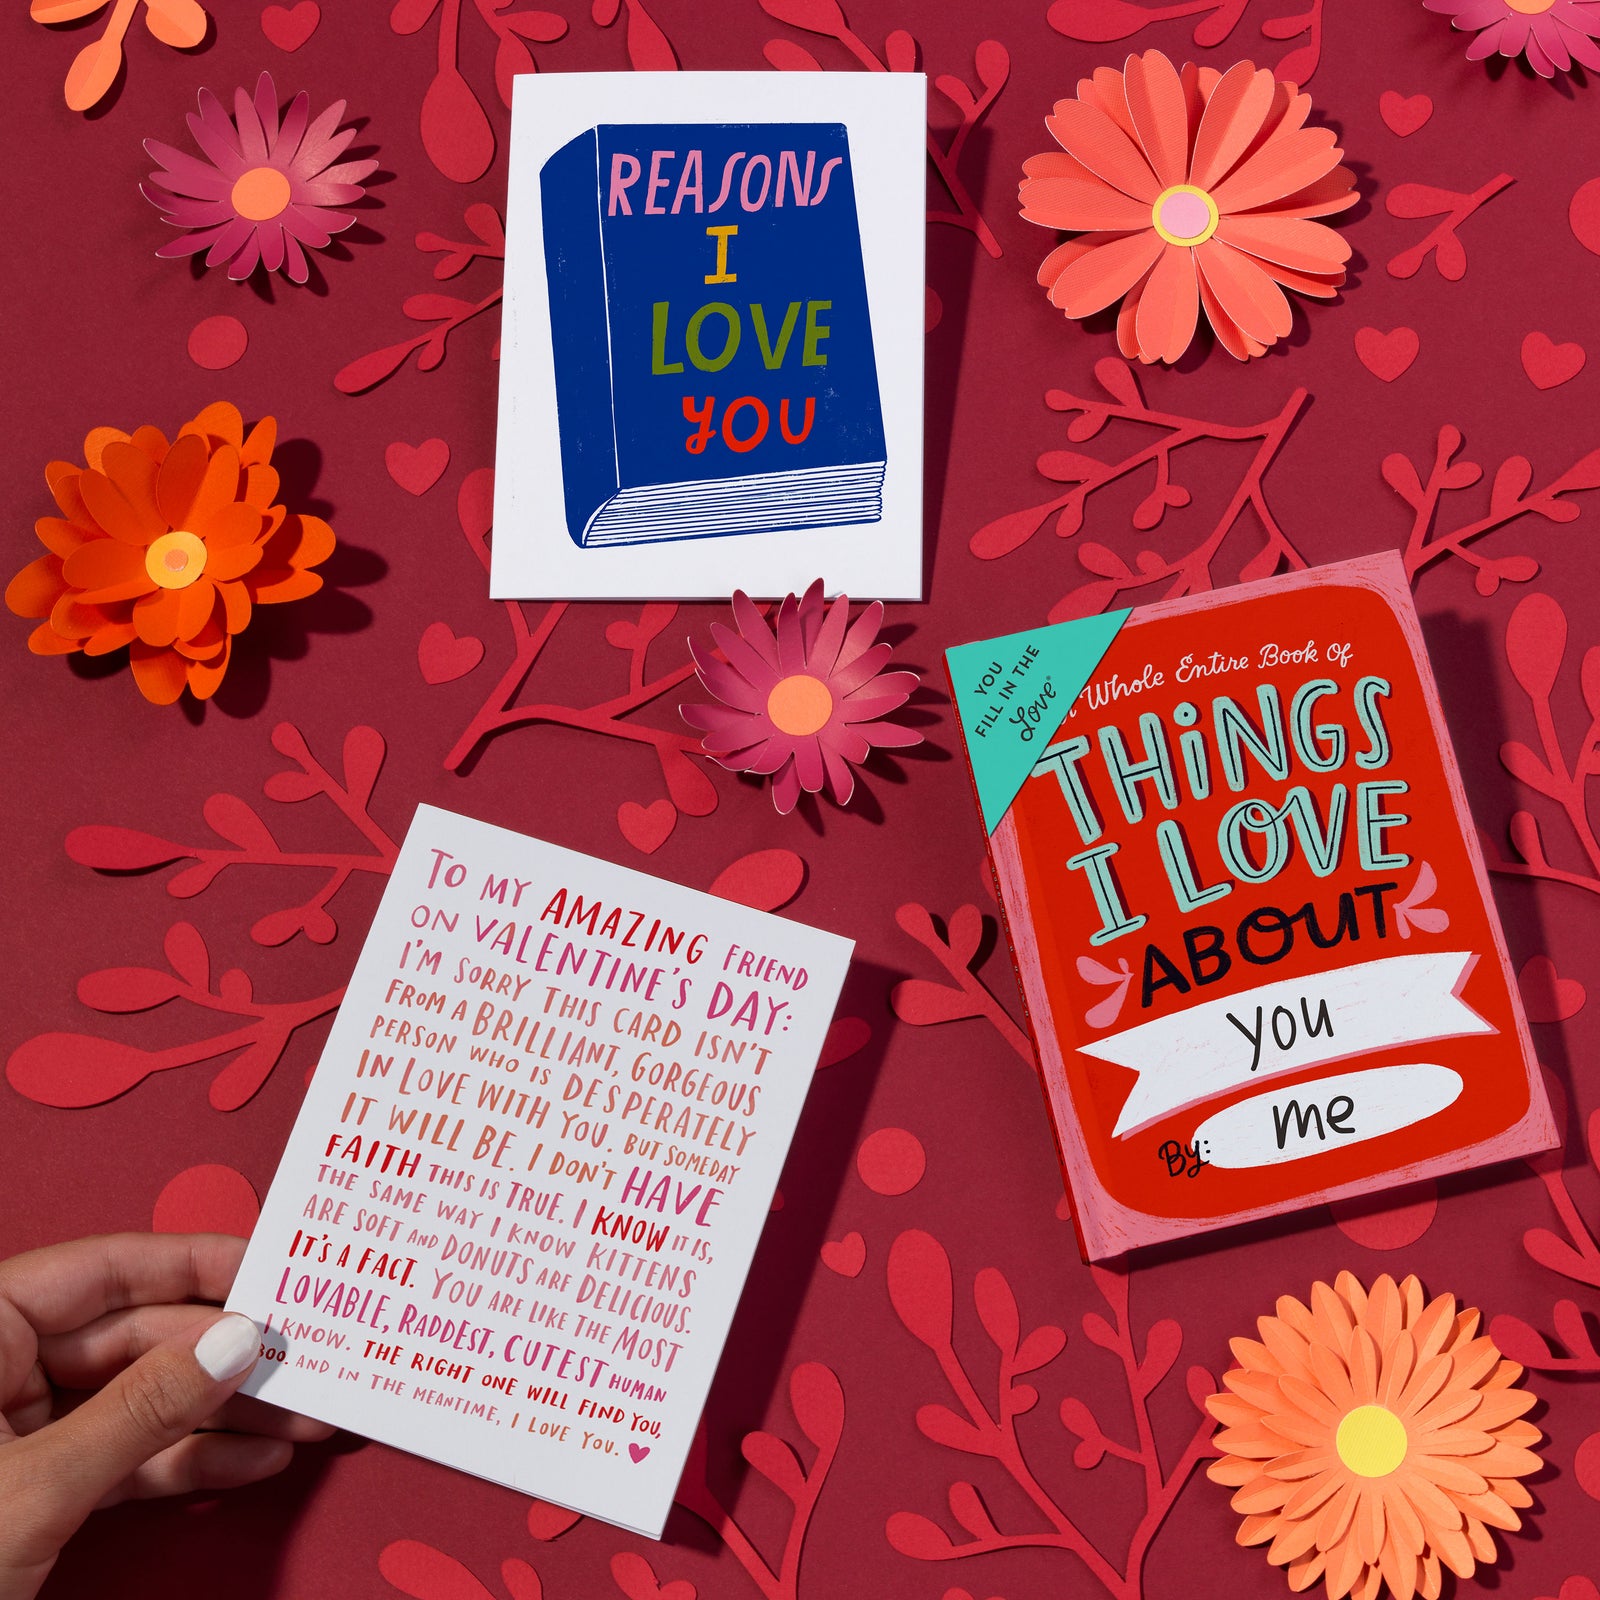 Emily McDowell Cards – Love, Emma - Care packages for life's hardest moments